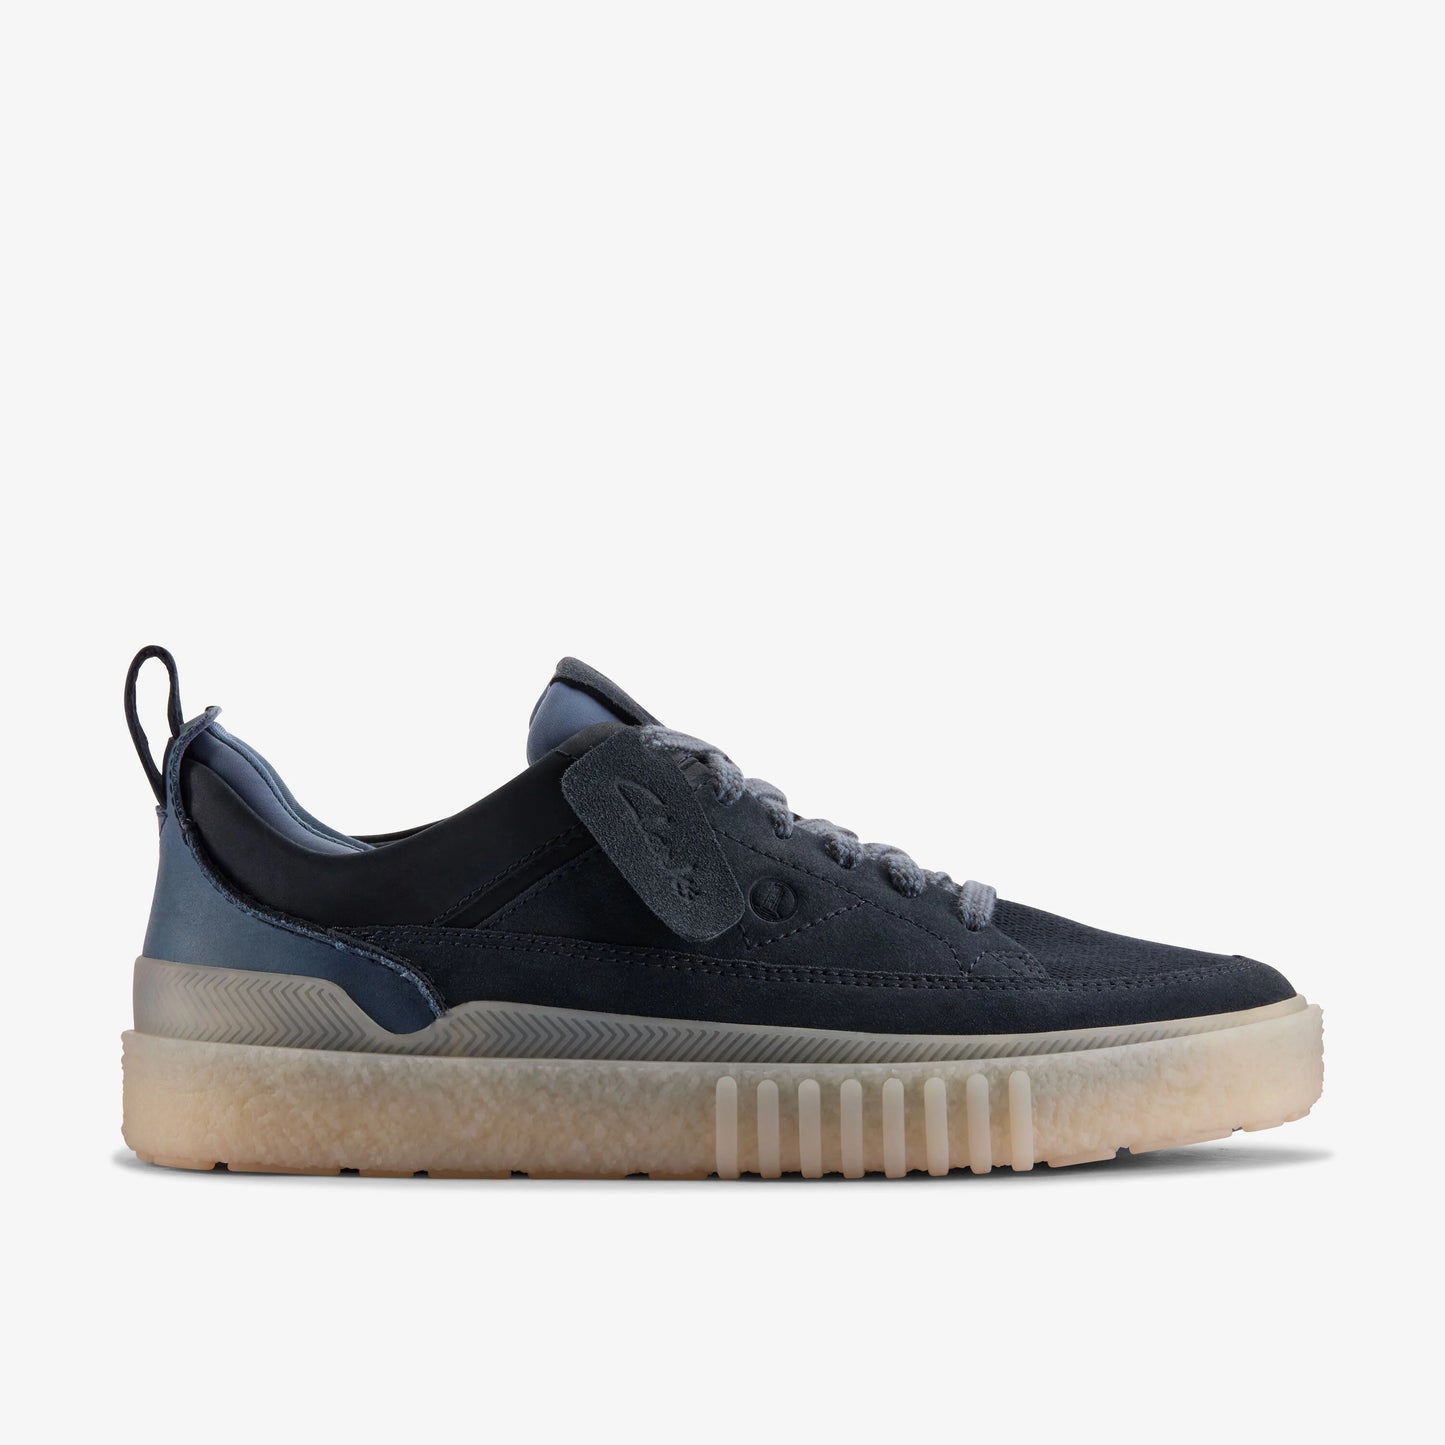 CLARKS | SABATES CASUALS PER A HOME | SOMERSET LACE NAVY SUEDE | BLAVA